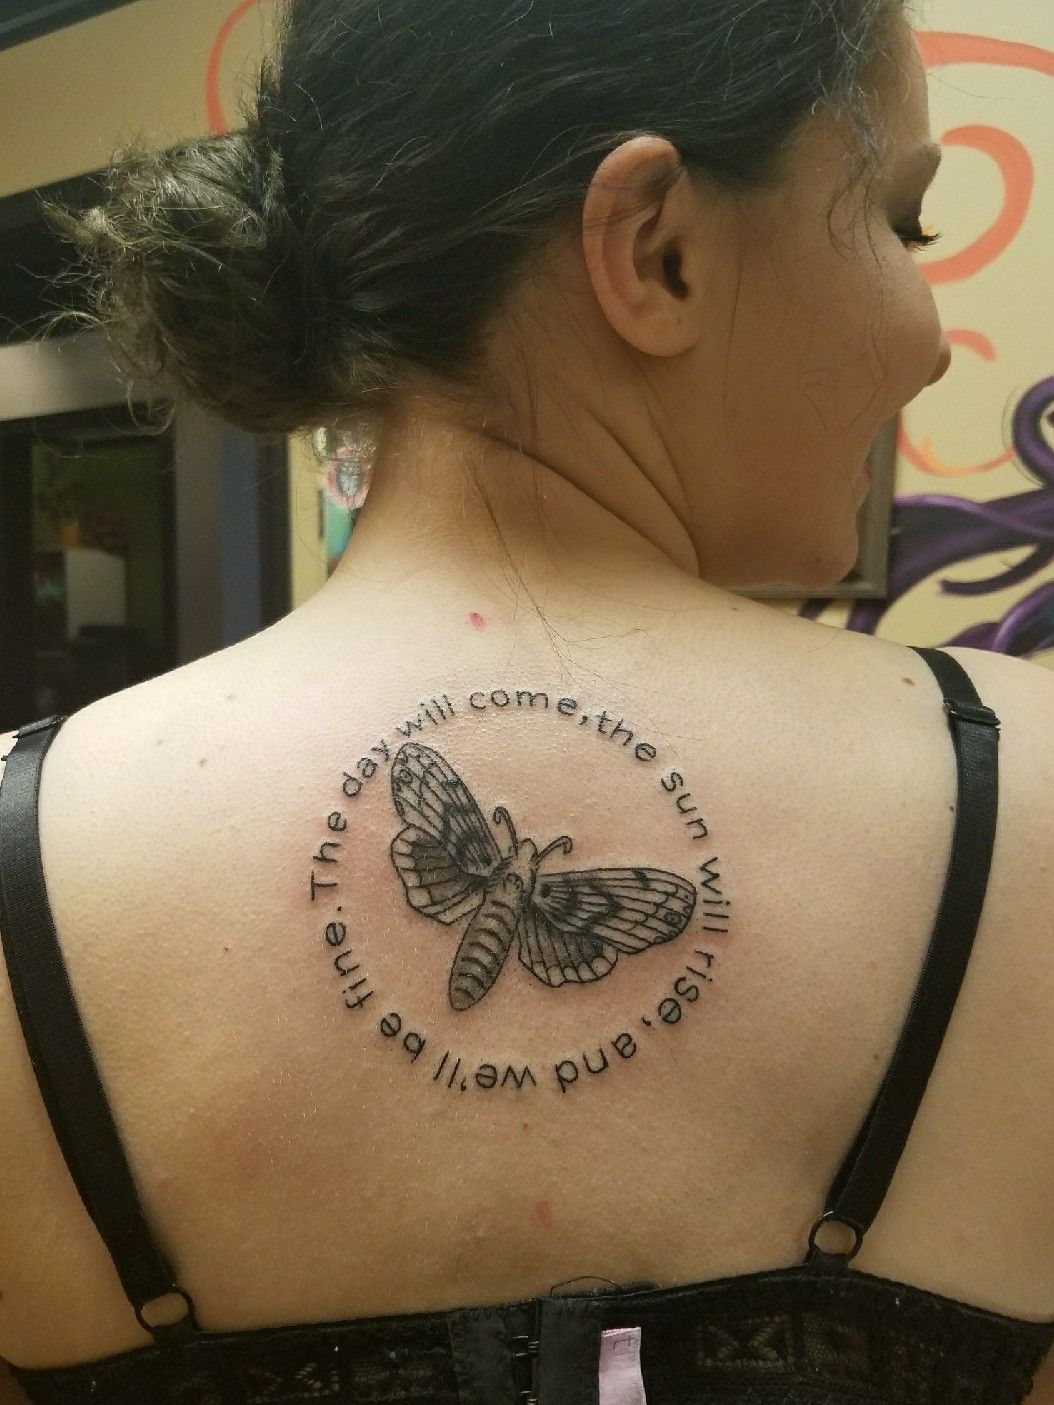 Tattoo uploaded by Brook Sibary  Moth from Avett Brothers album four  thieves gone with the quote the day will come the sun will rise and  well be fine  Tattoodo